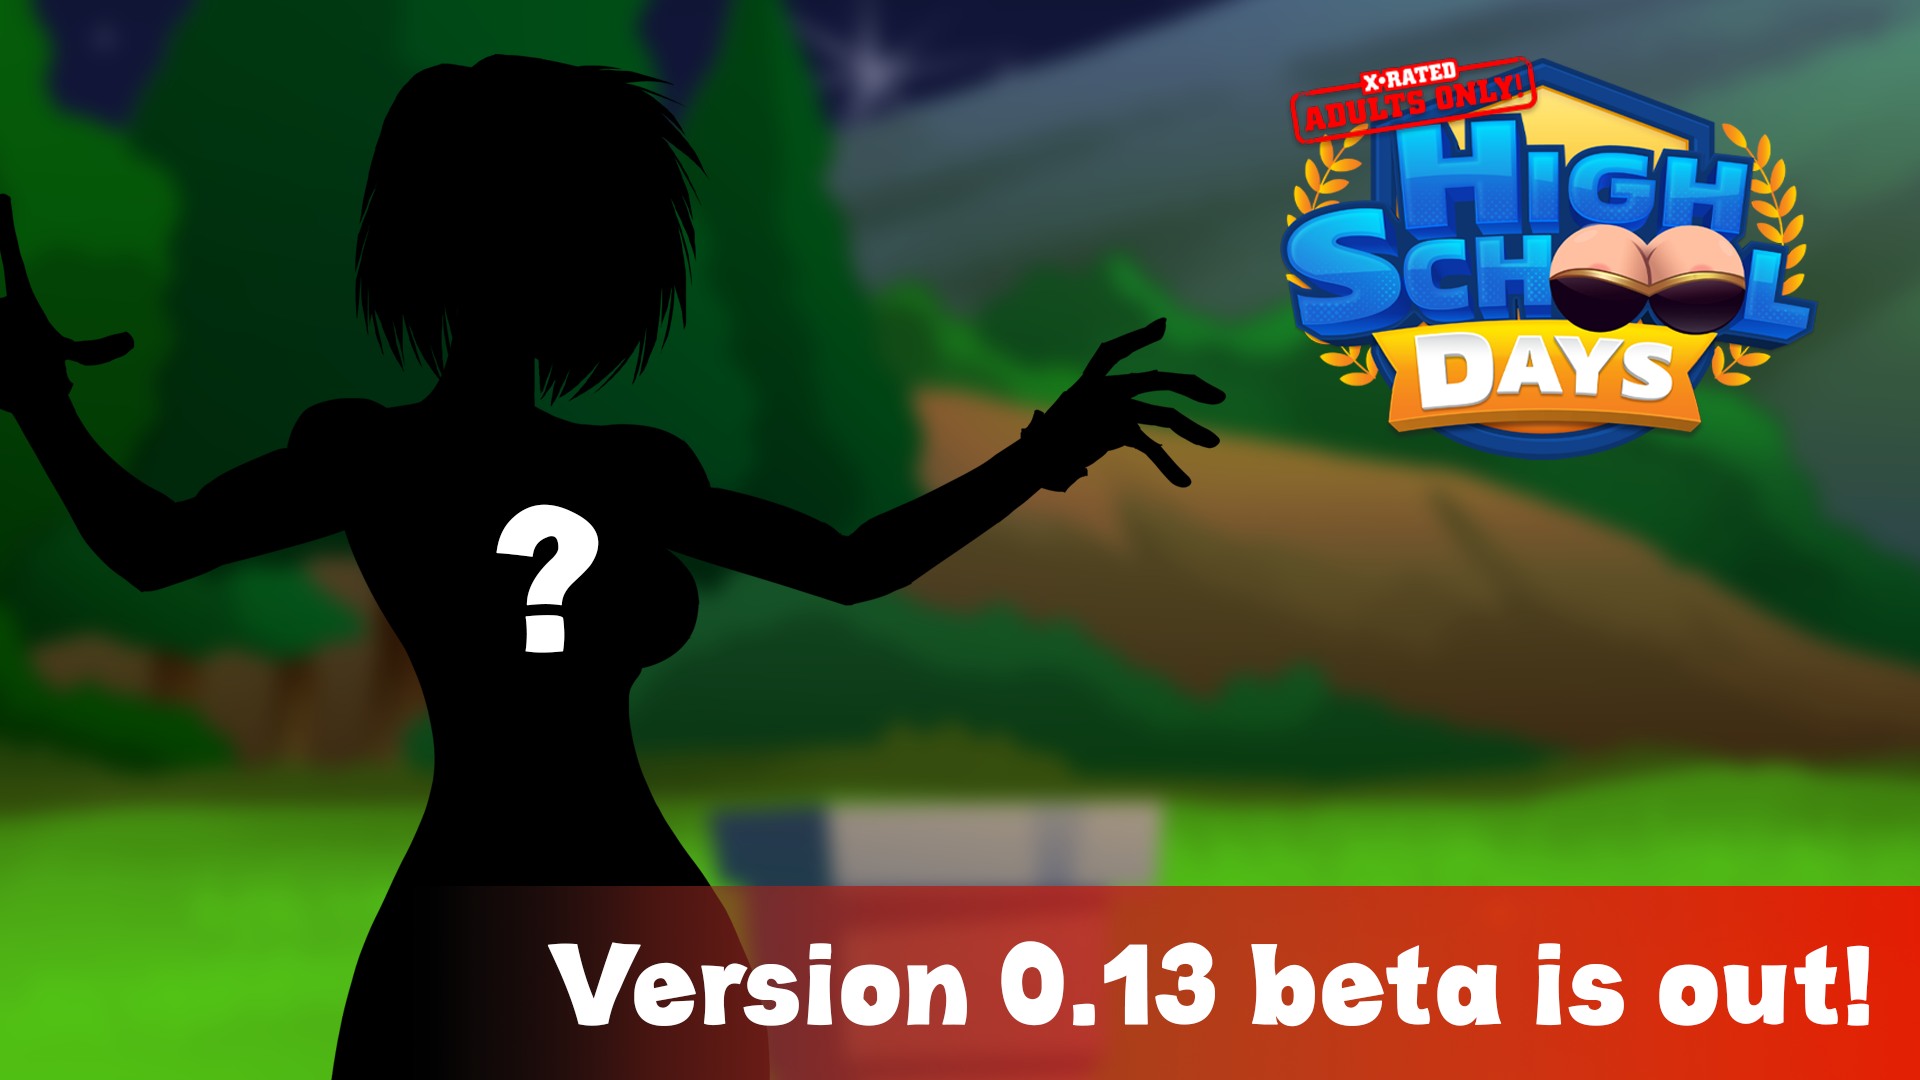 Version 0.13 beta is out!